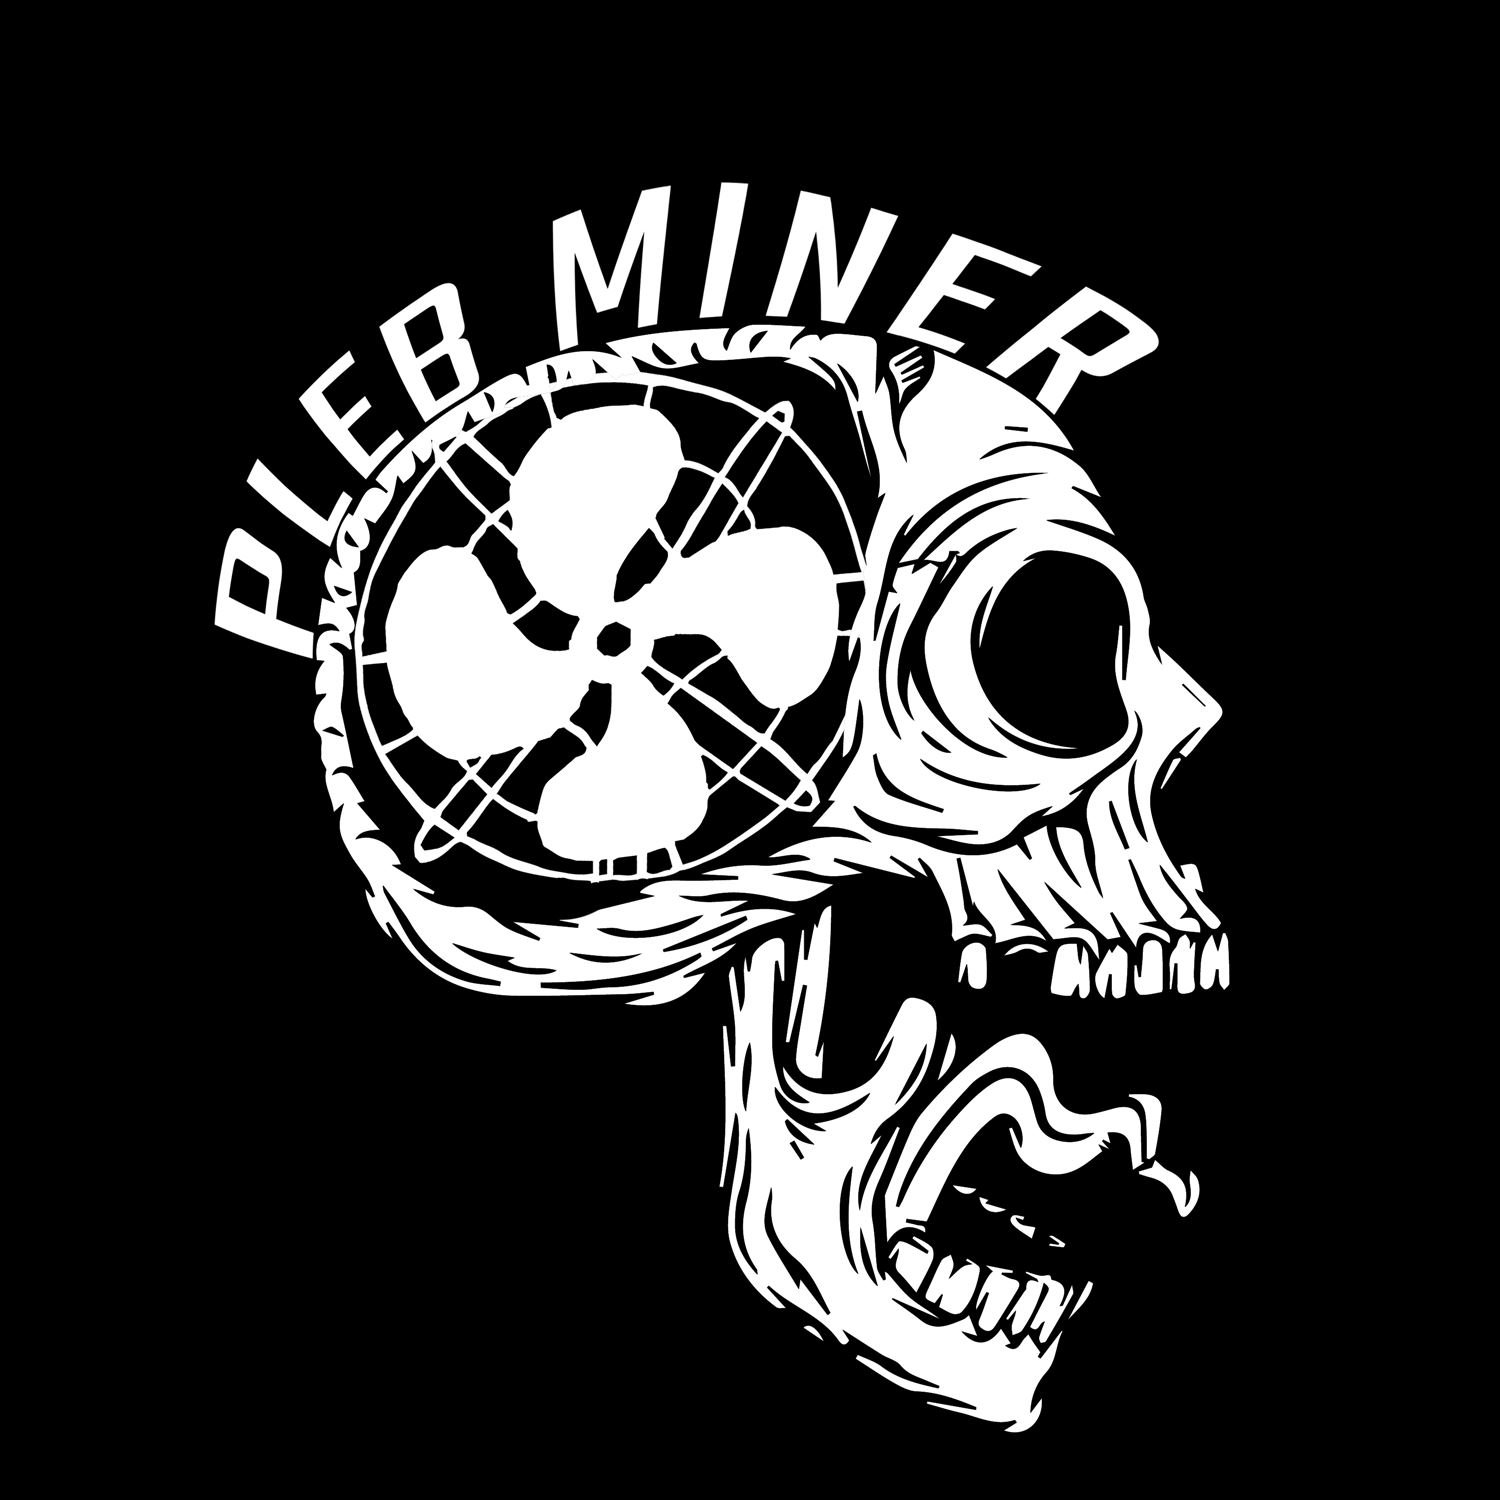 Pleb Miner Monthly EP 3 - Crypto cloaks Hashlight will satisfy you and some other bitcoin stuff